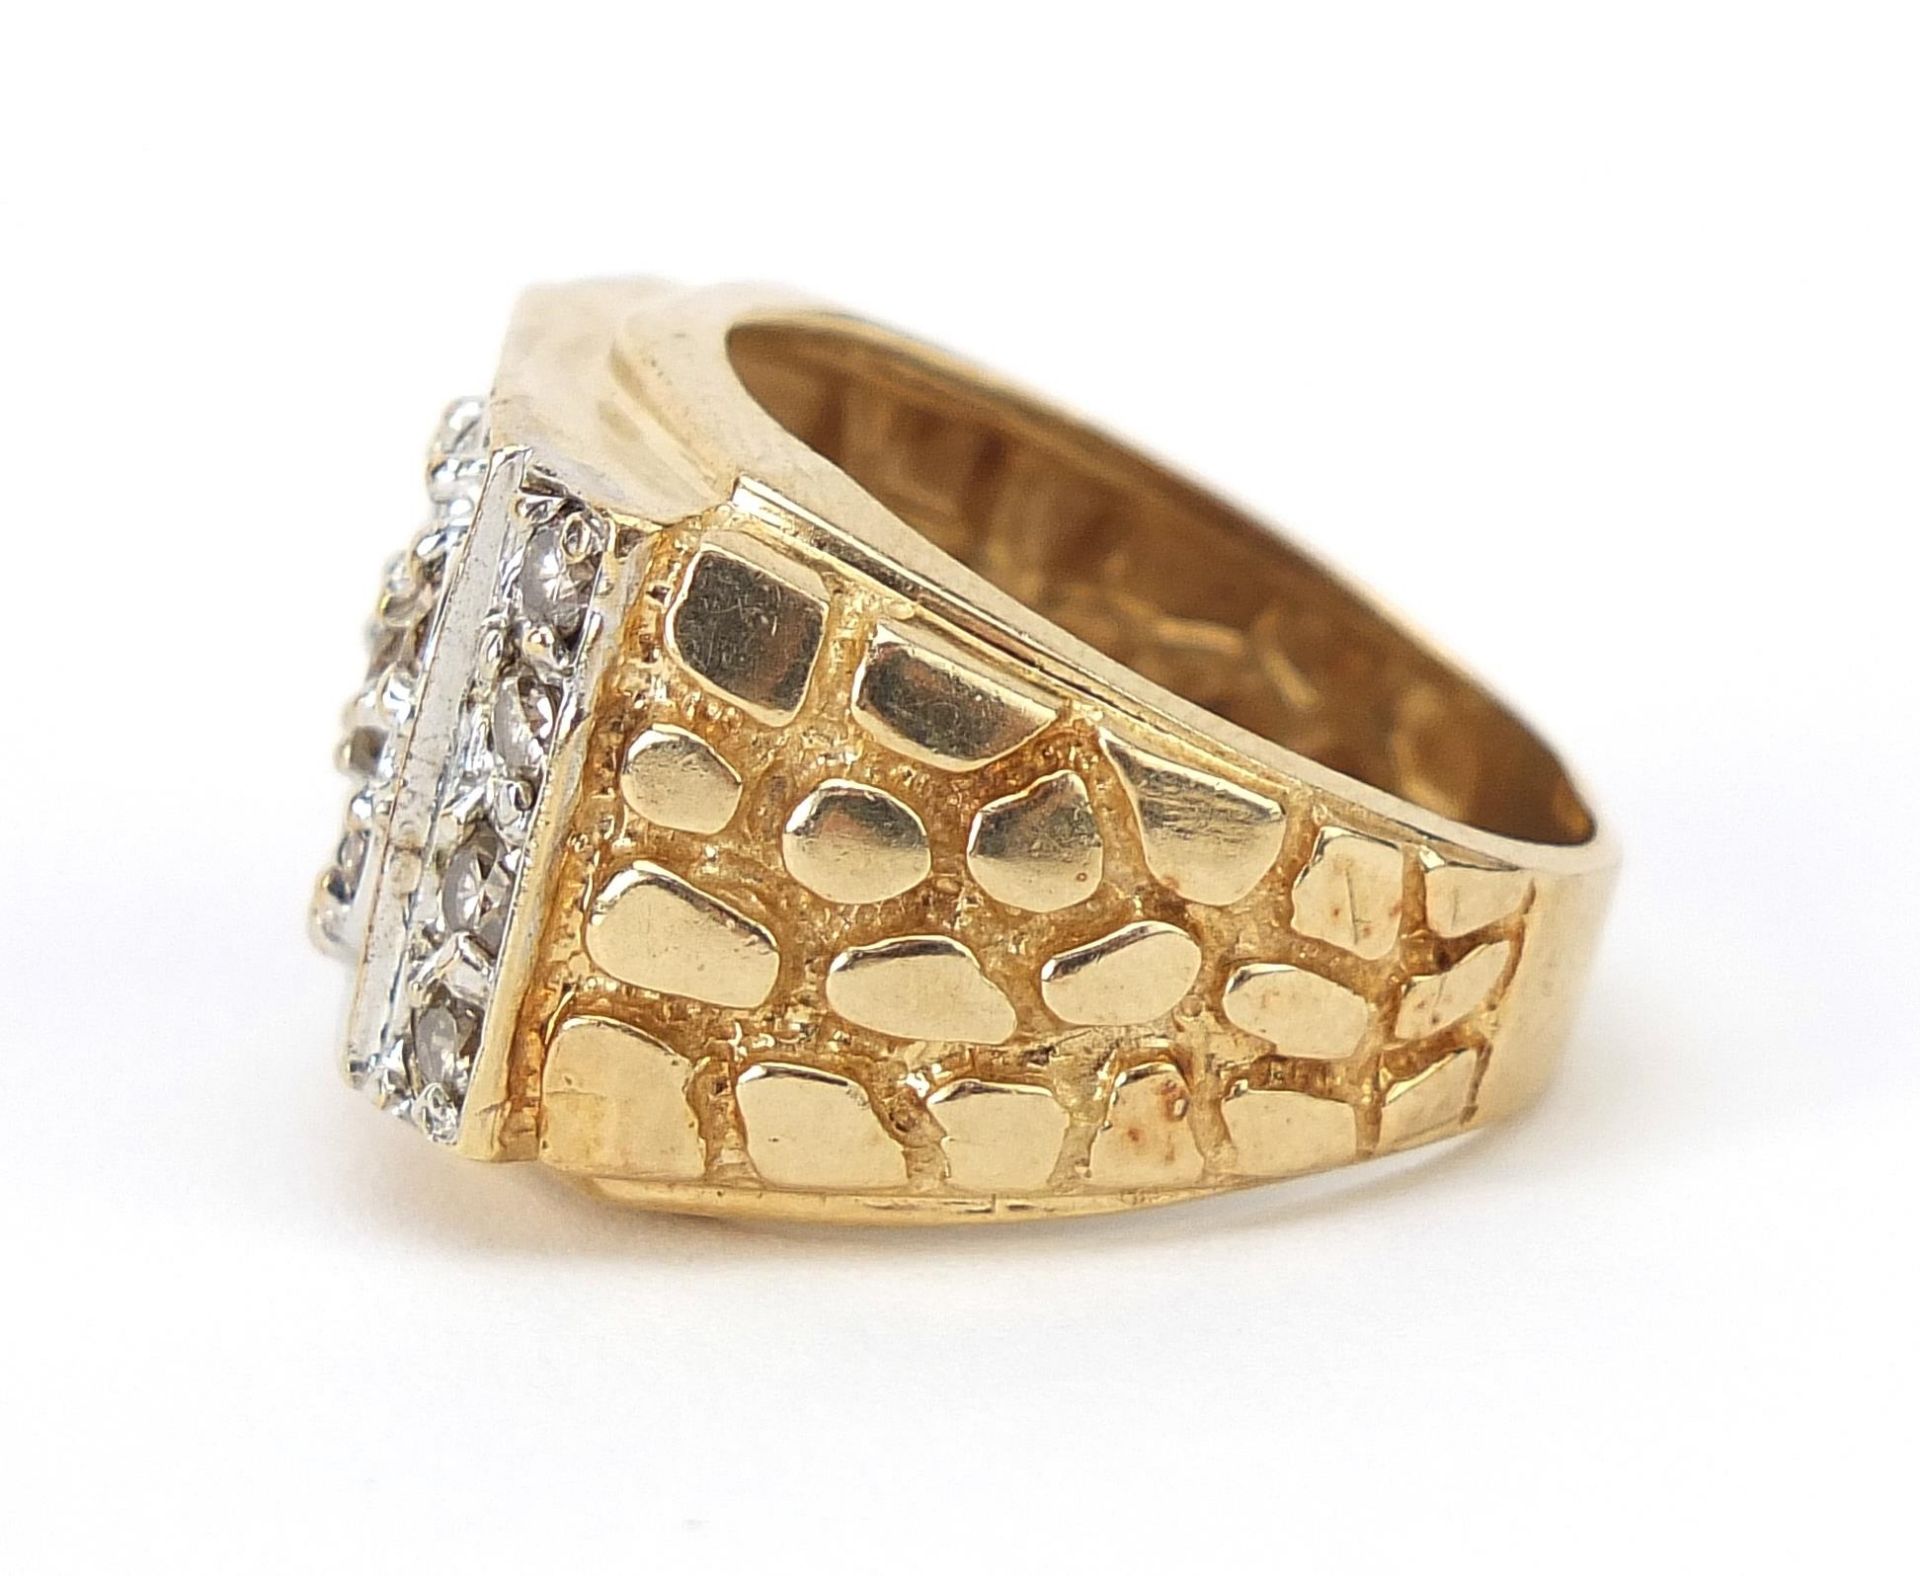 14ct two tone gold Champagne diamond ring, each diamond between 0.3 and 0.4ct each, size U/V, 12.6g - Image 2 of 5